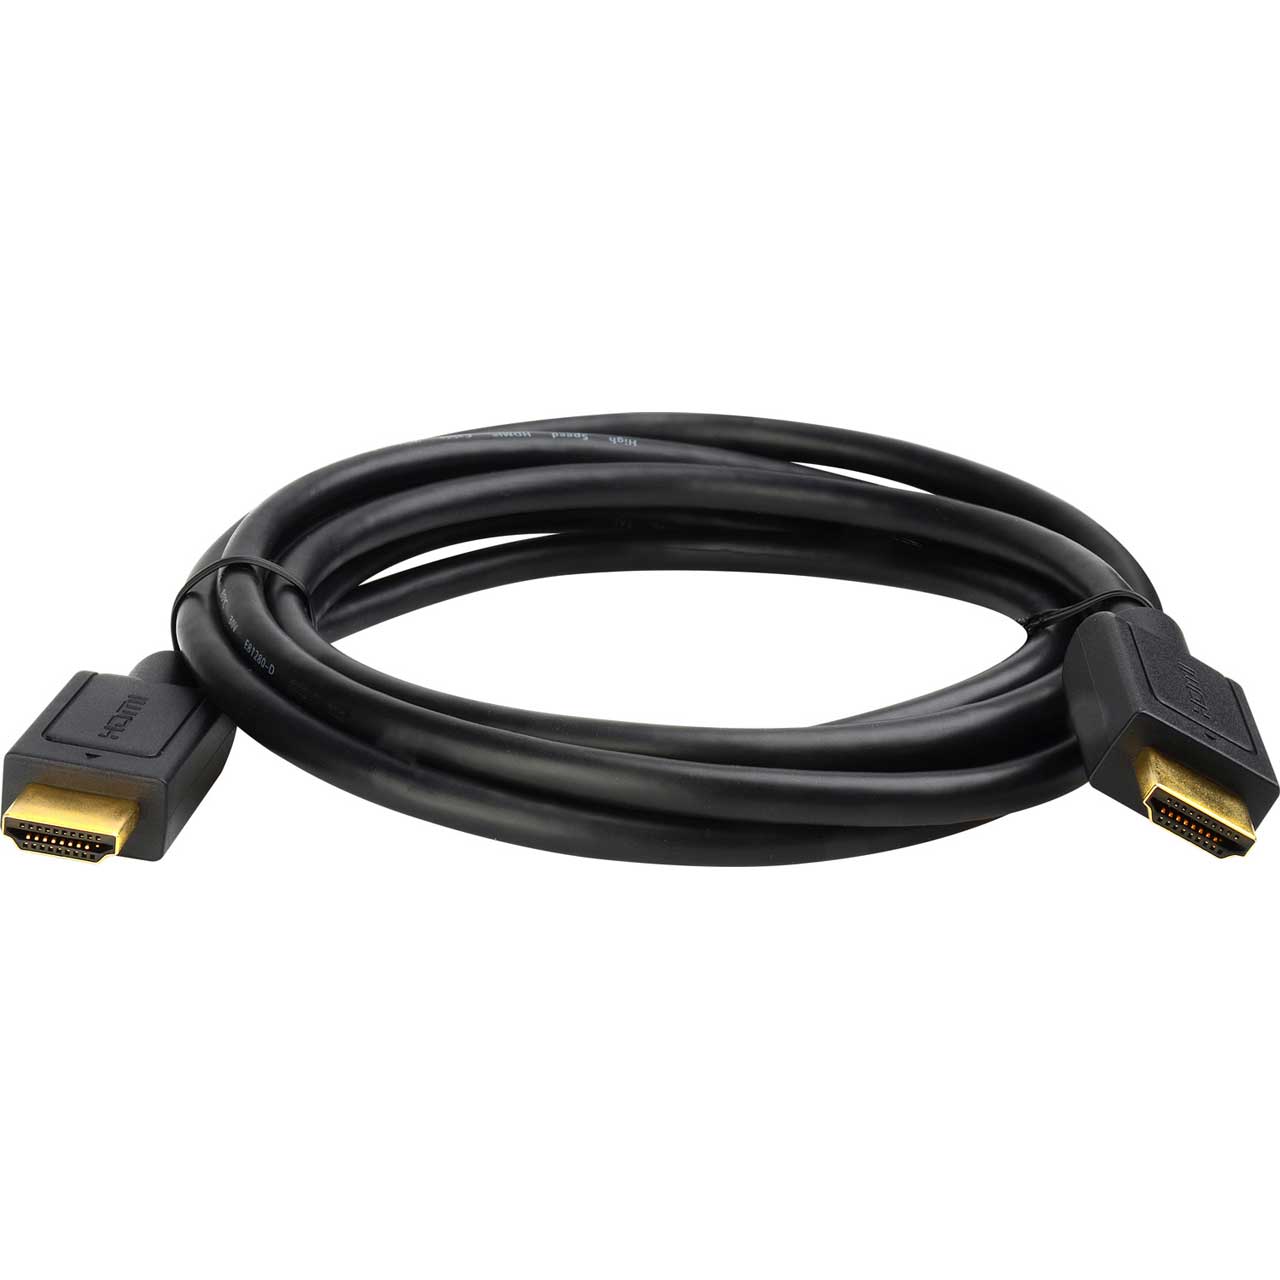 Connectronics 4K/2K HDMI Cable v1.4 Ethernet Type-A Male to Male - 6 Foot